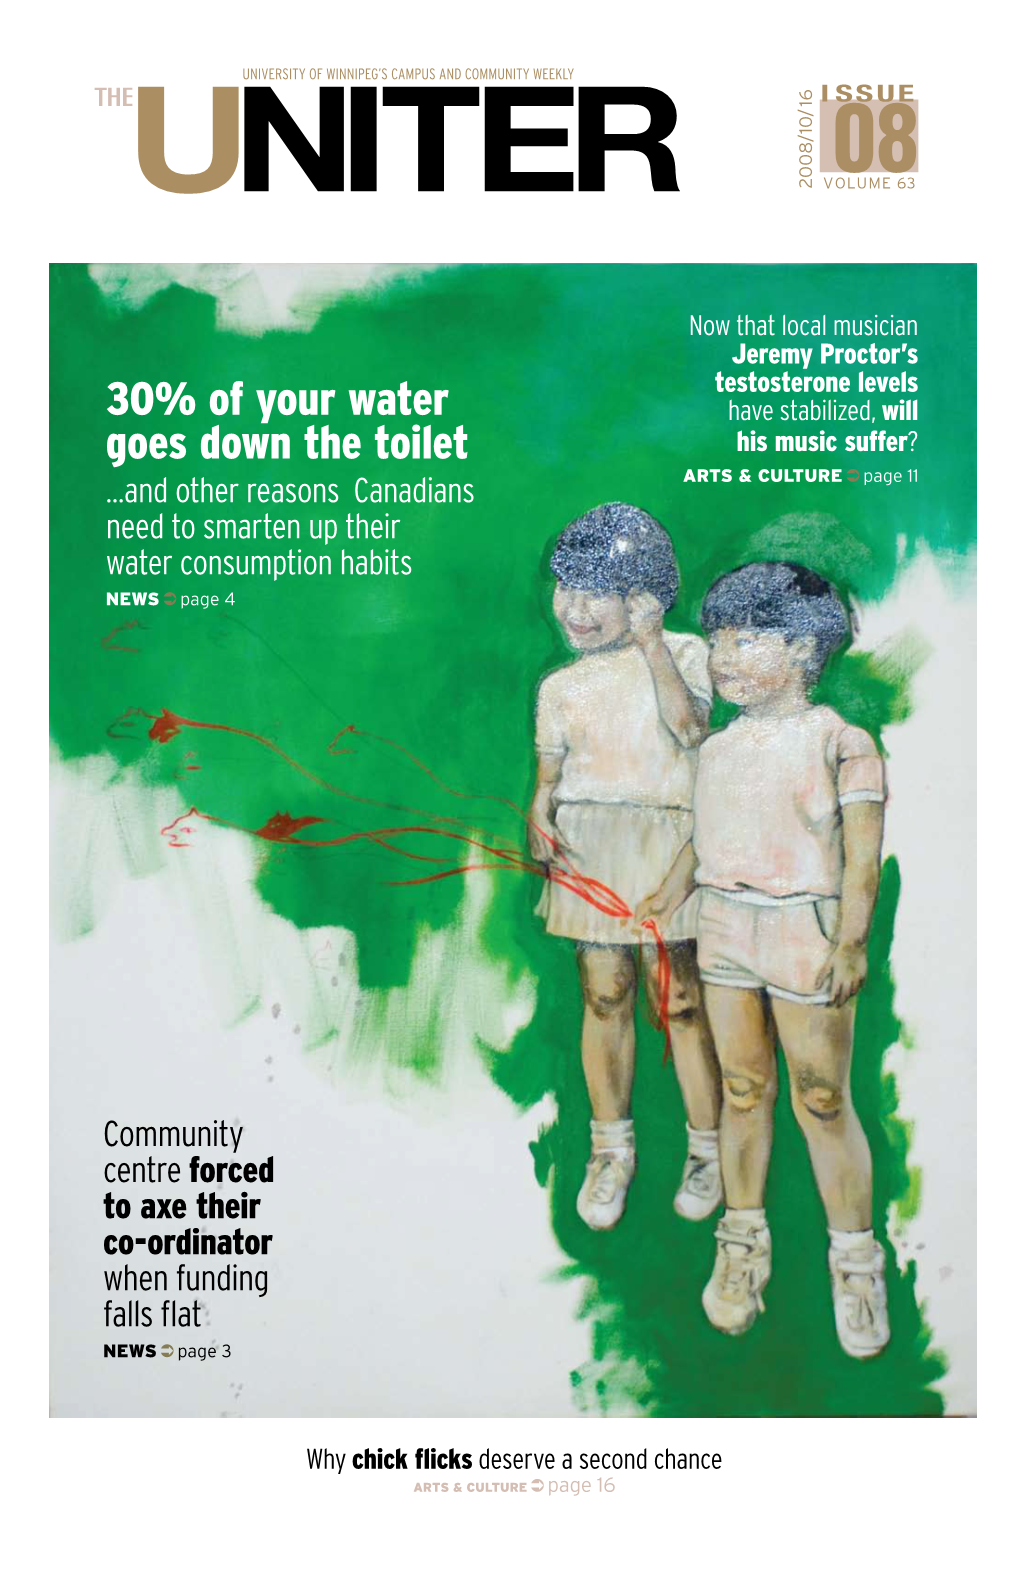 30% of Your Water Goes Down the Toilet